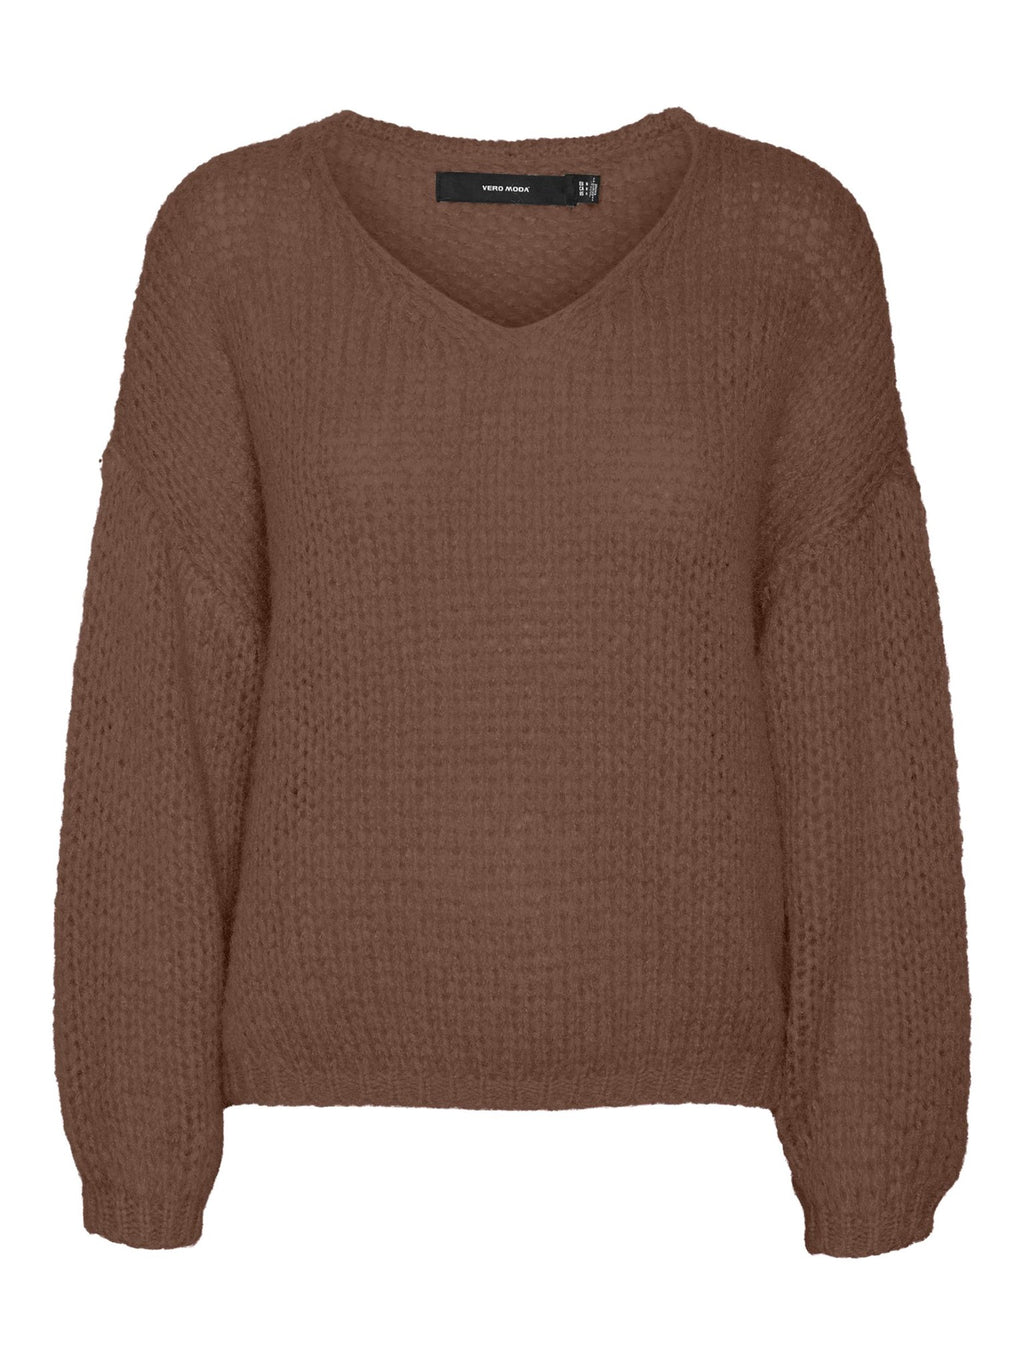 Soft Erin Knit - Cocoa Brown